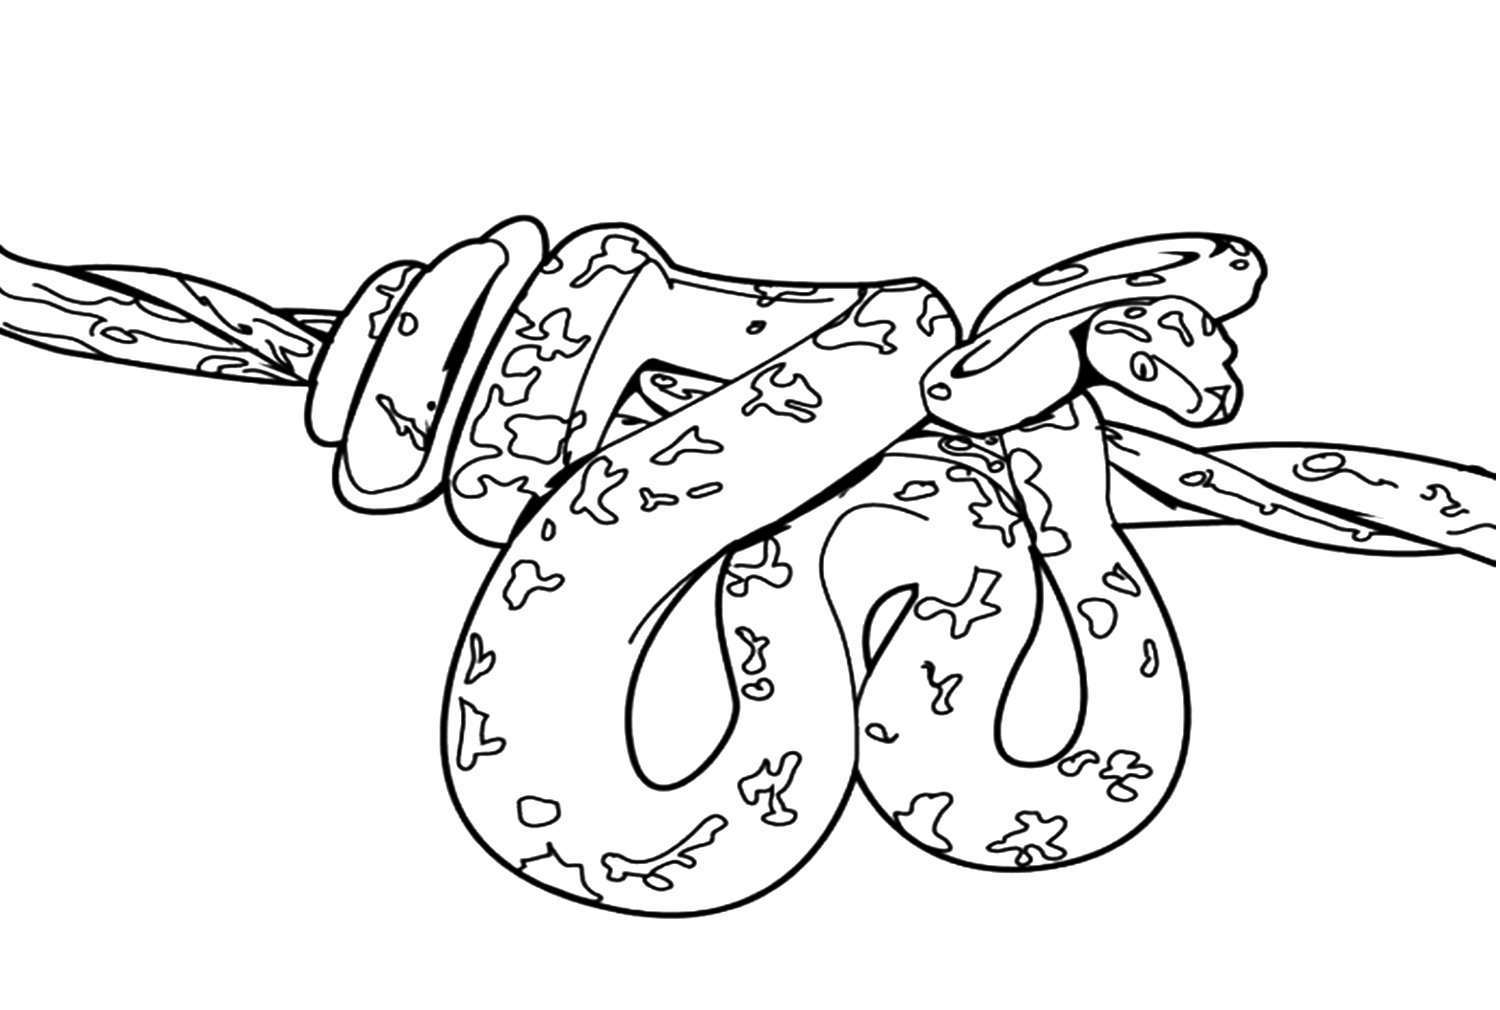 Python Coloring Page To Print Coloring Page